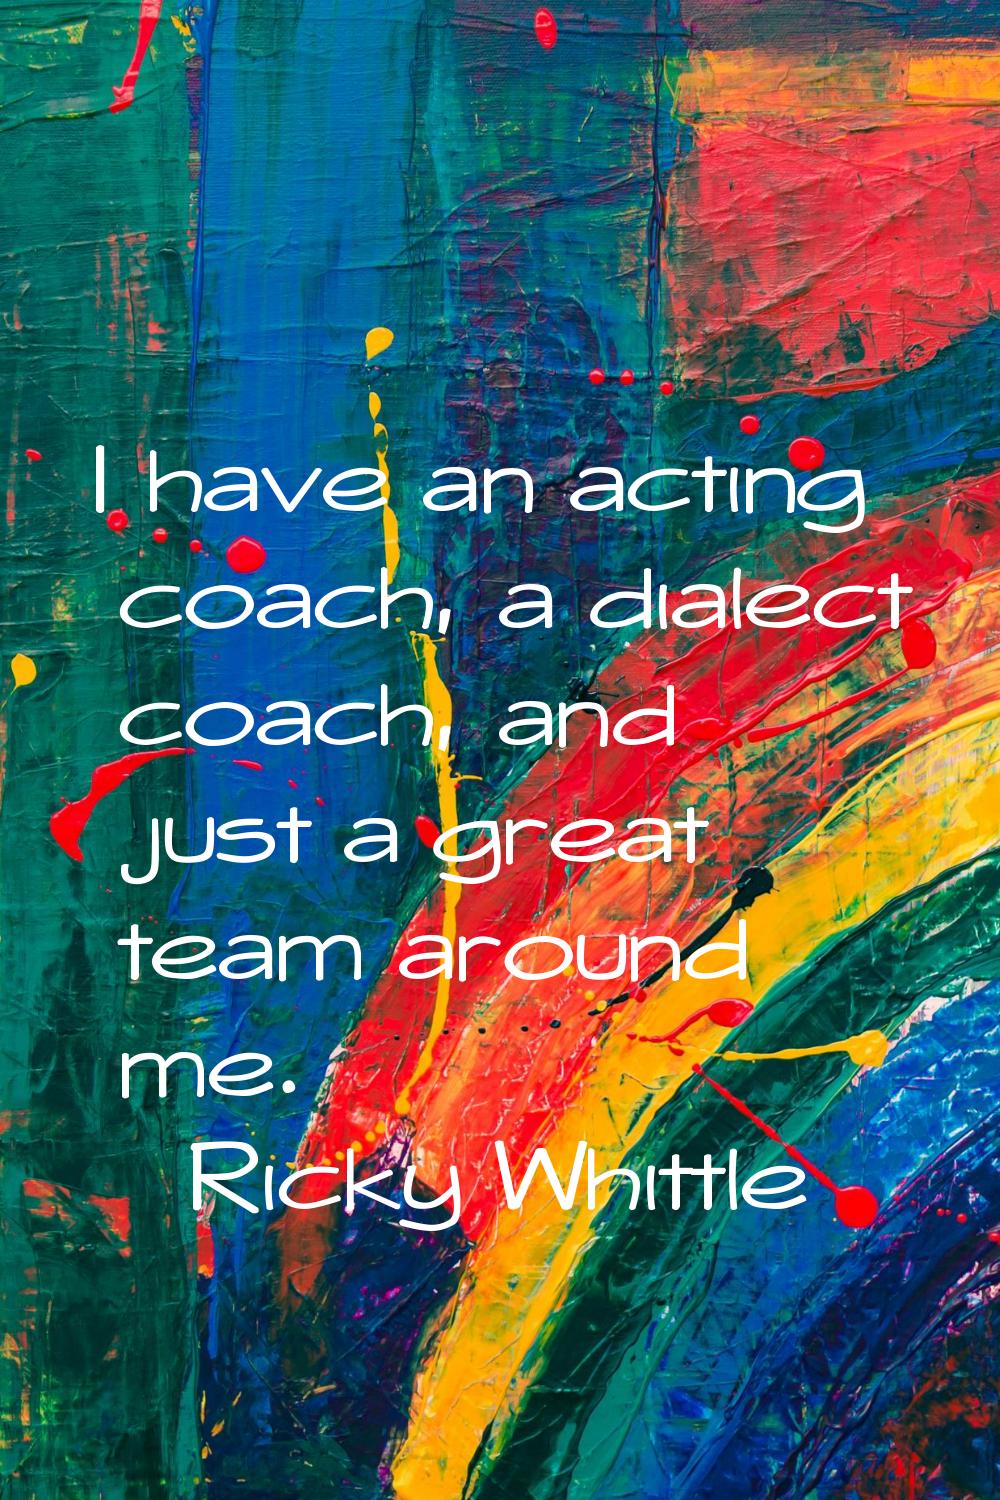 I have an acting coach, a dialect coach, and just a great team around me.